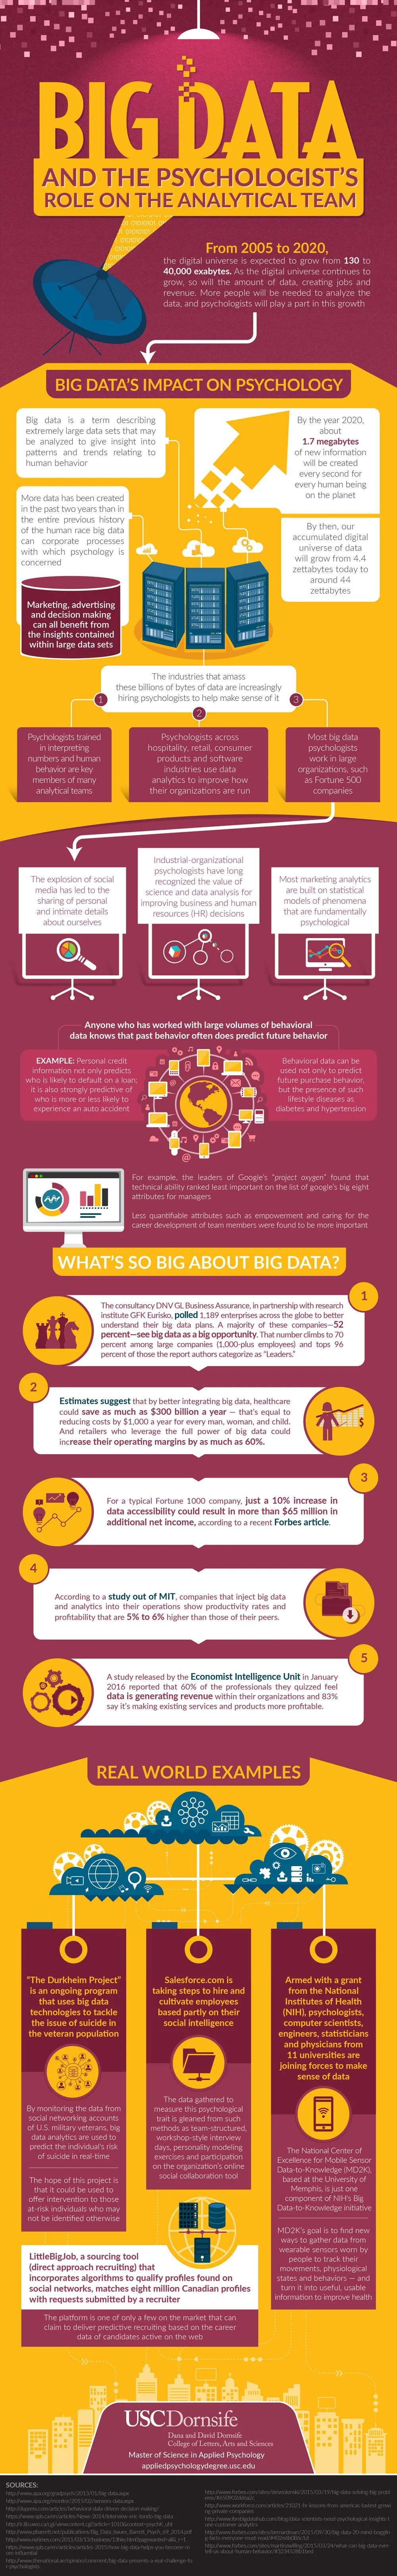 Big Data and the Psychologist's Role on the Analytical Team - #infographic